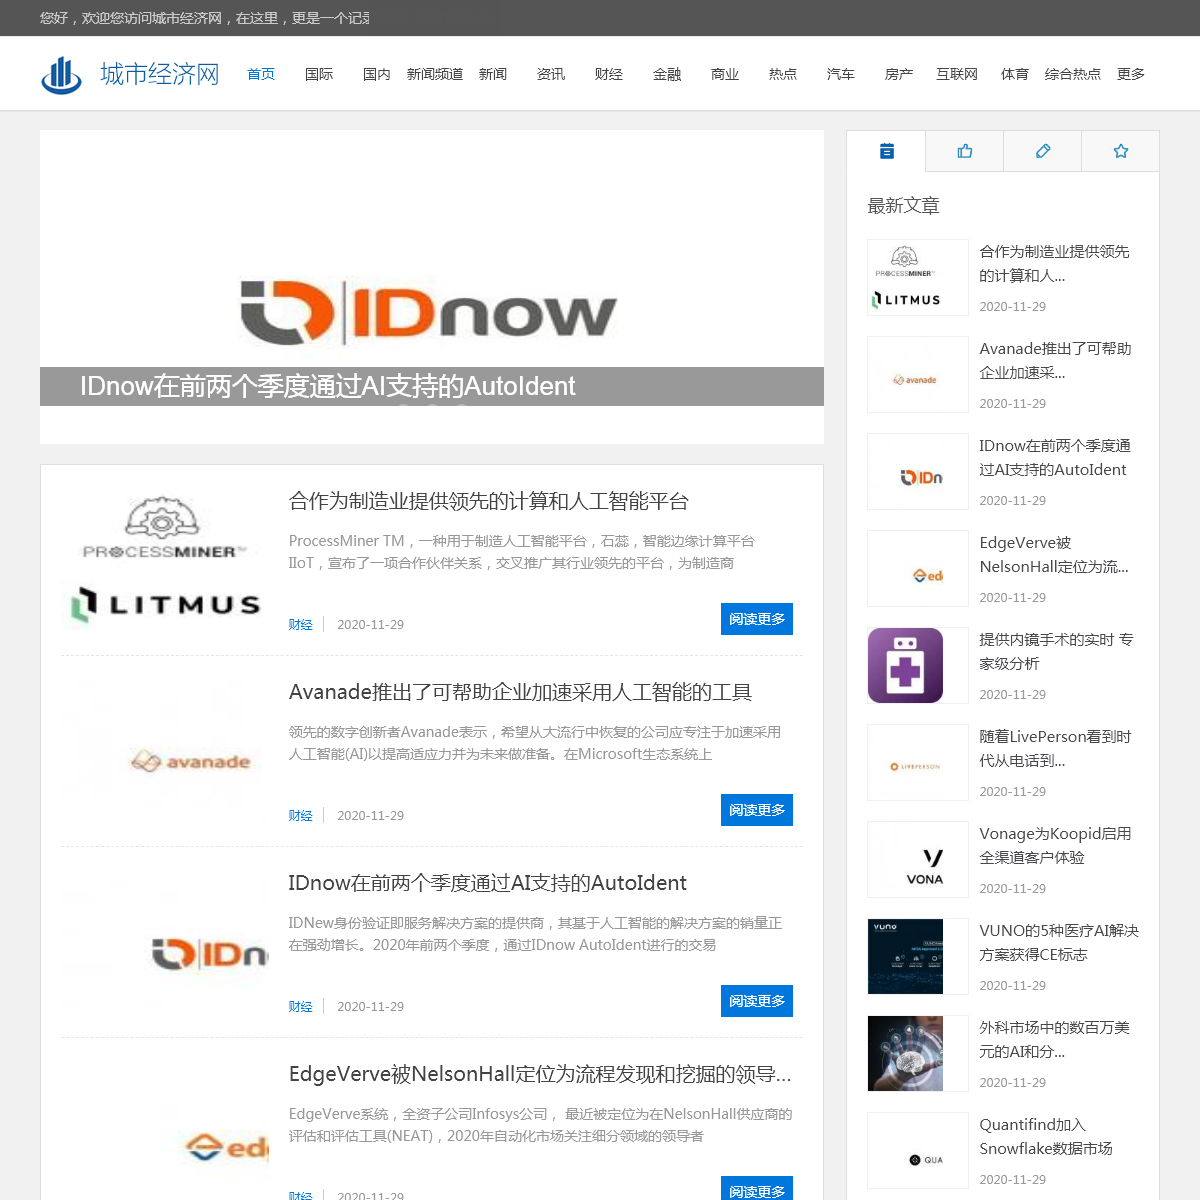 A complete backup of chengw.com